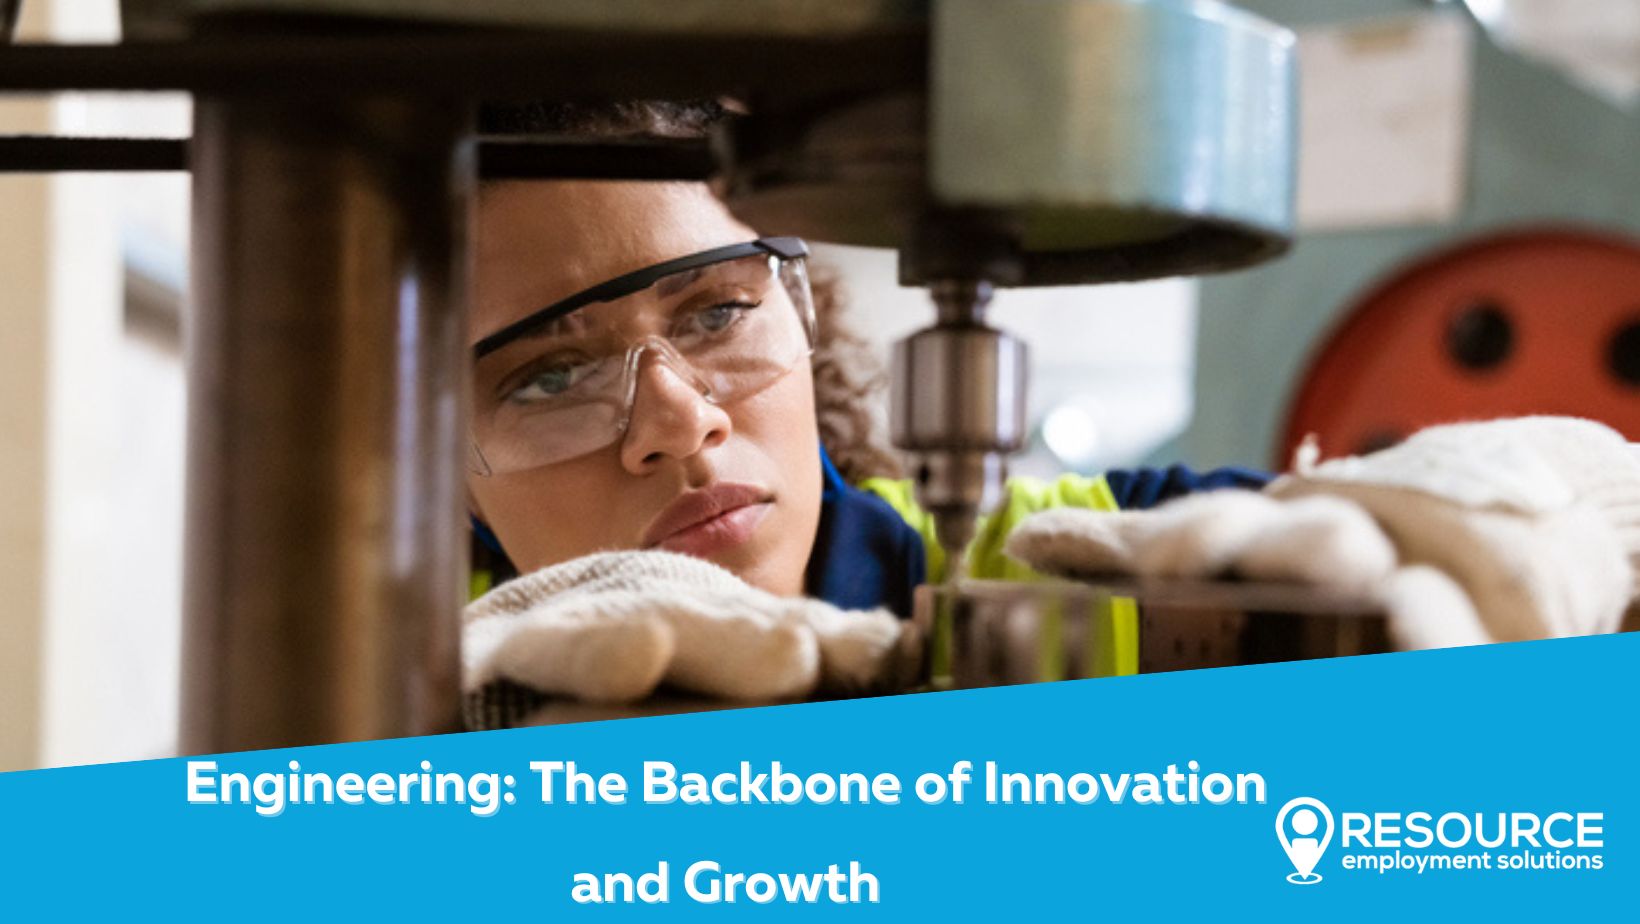 Engineering: The Backbone of Innovation and Growth